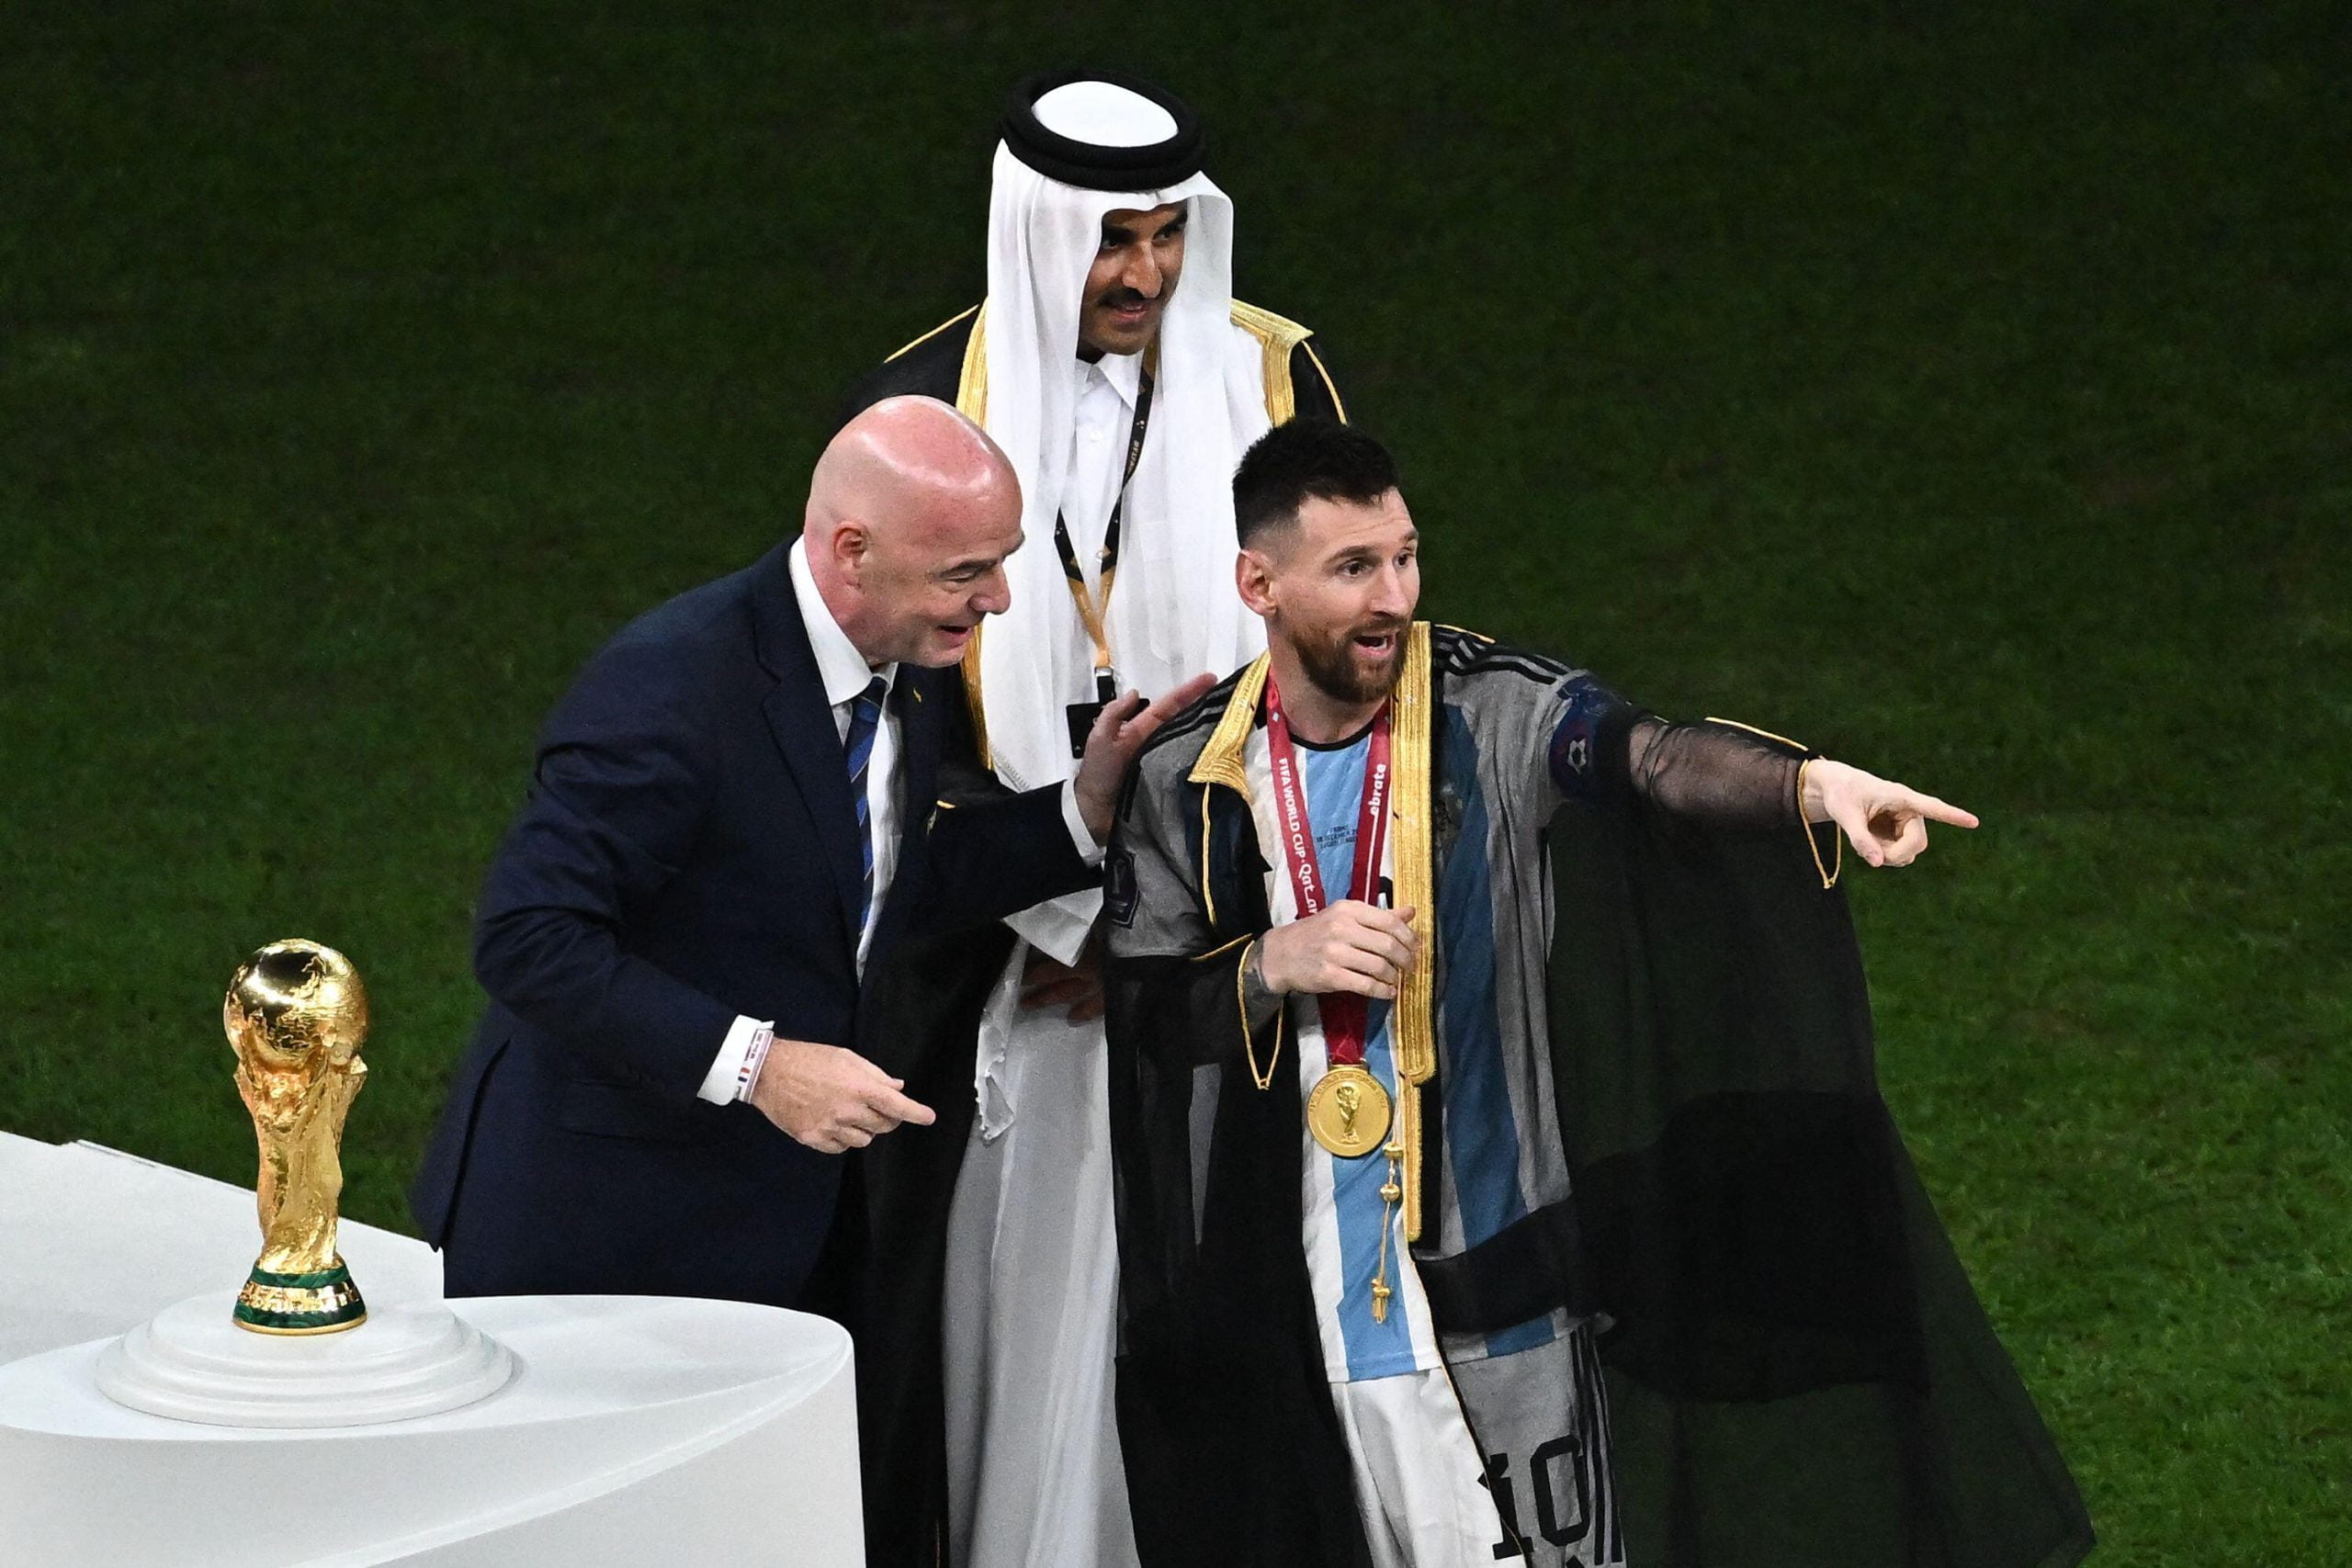 Messi sets five Guinness World Records during World Cup in Qatar